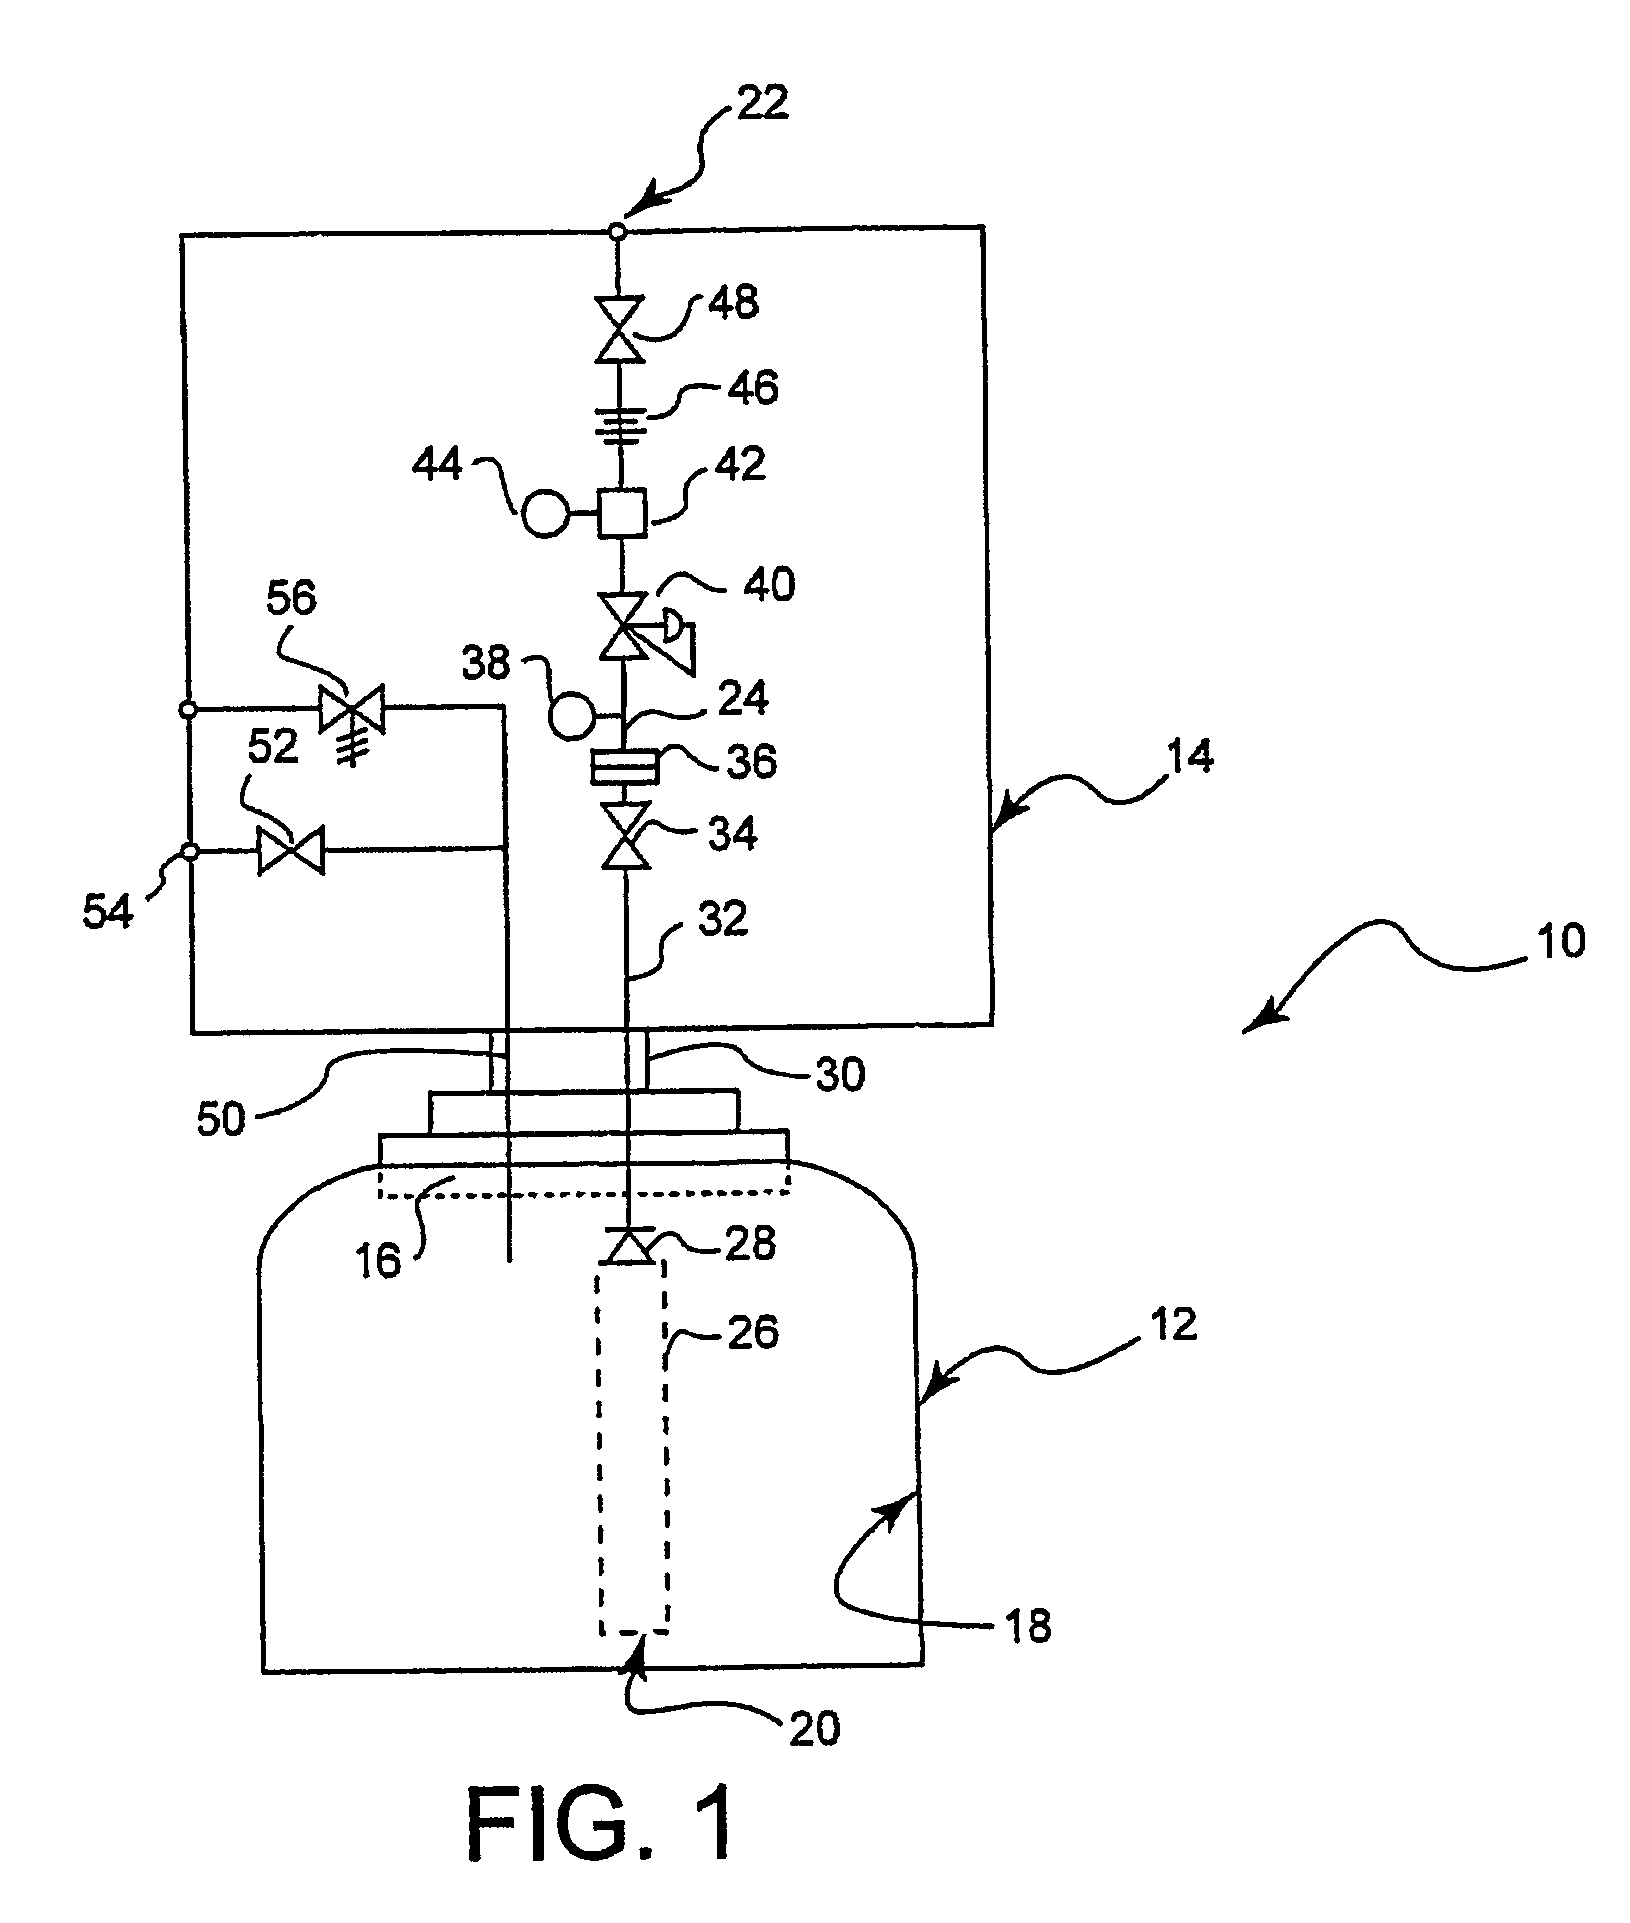 Assembly and method for containing, receiving and storing fluids and for dispensing gas from a fluid control and gas delivery assembly having an integrated fluid flow restrictor